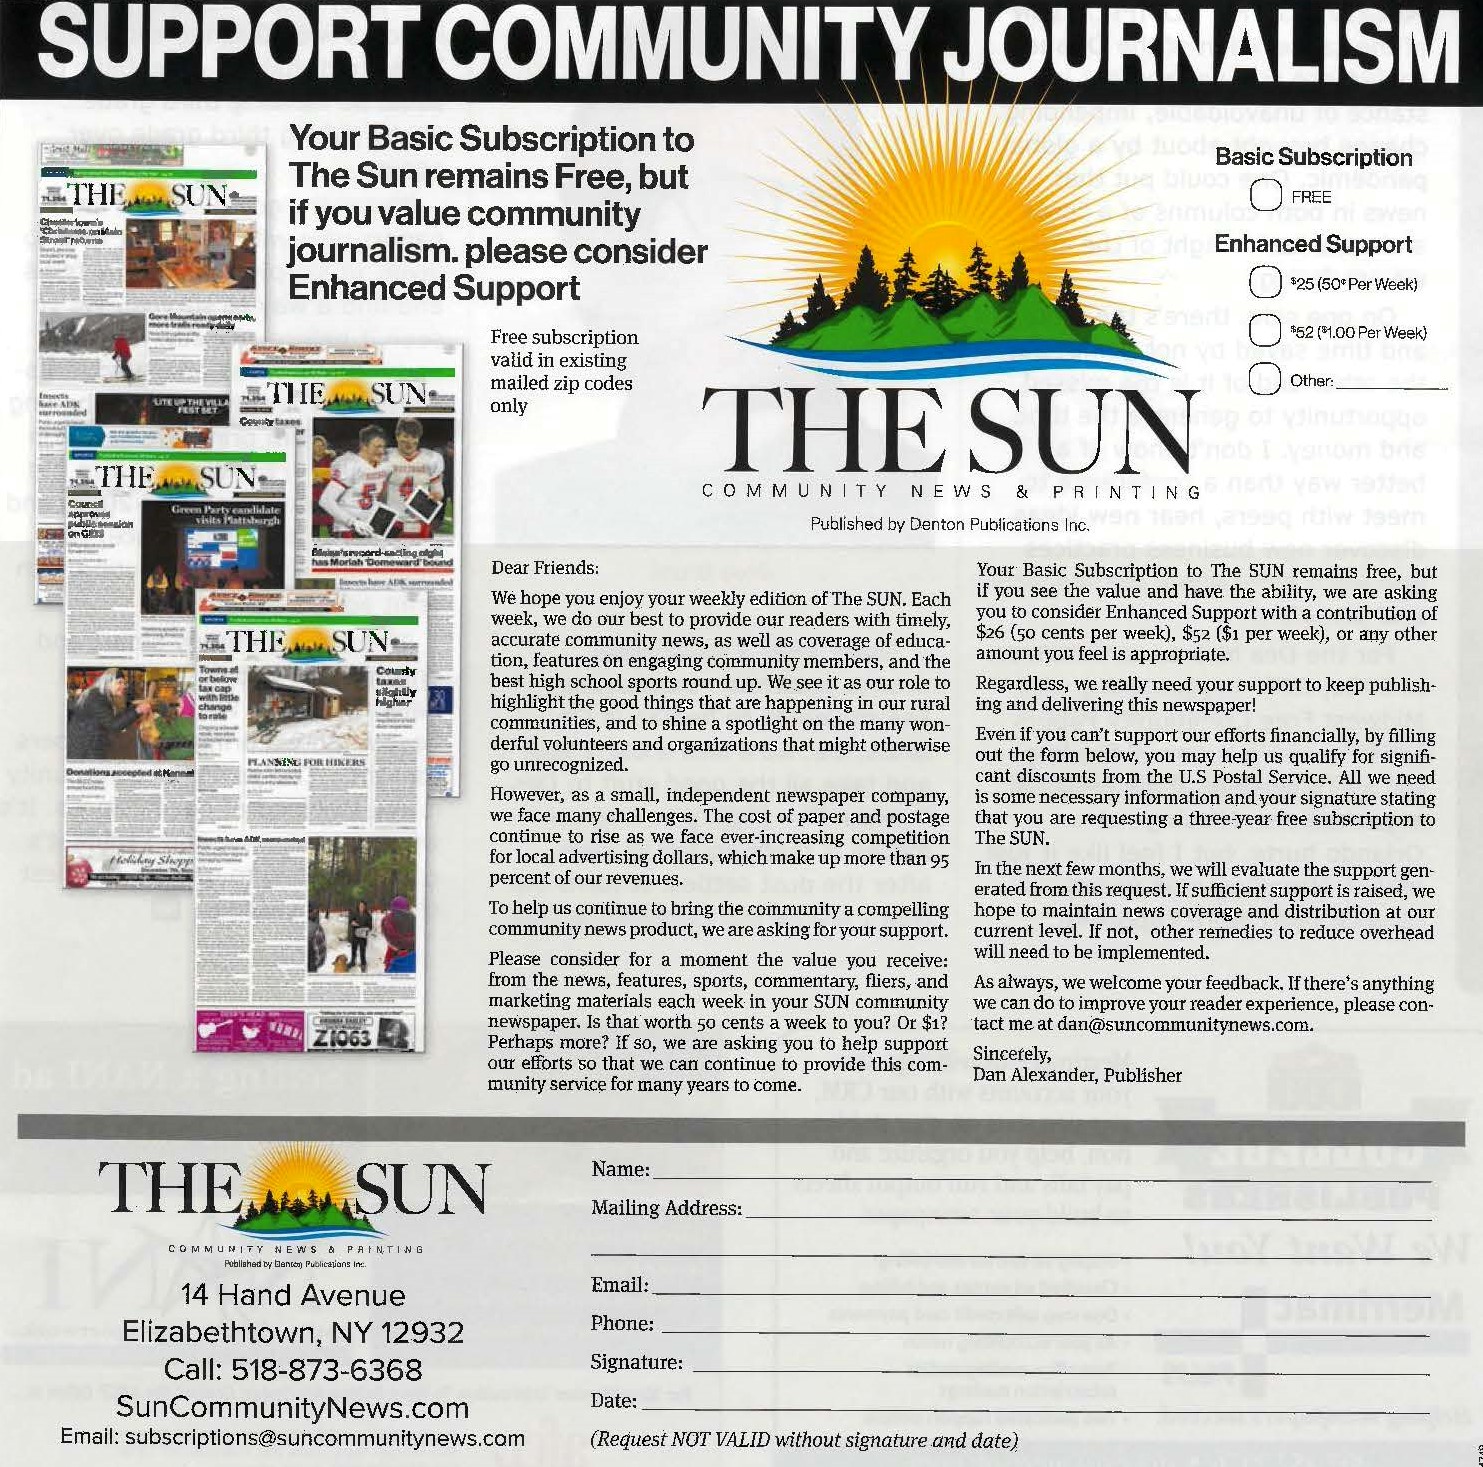 Idea #26 of 50 Days of Ideas! SUPPORT COMMUNITY JOURNALISM!